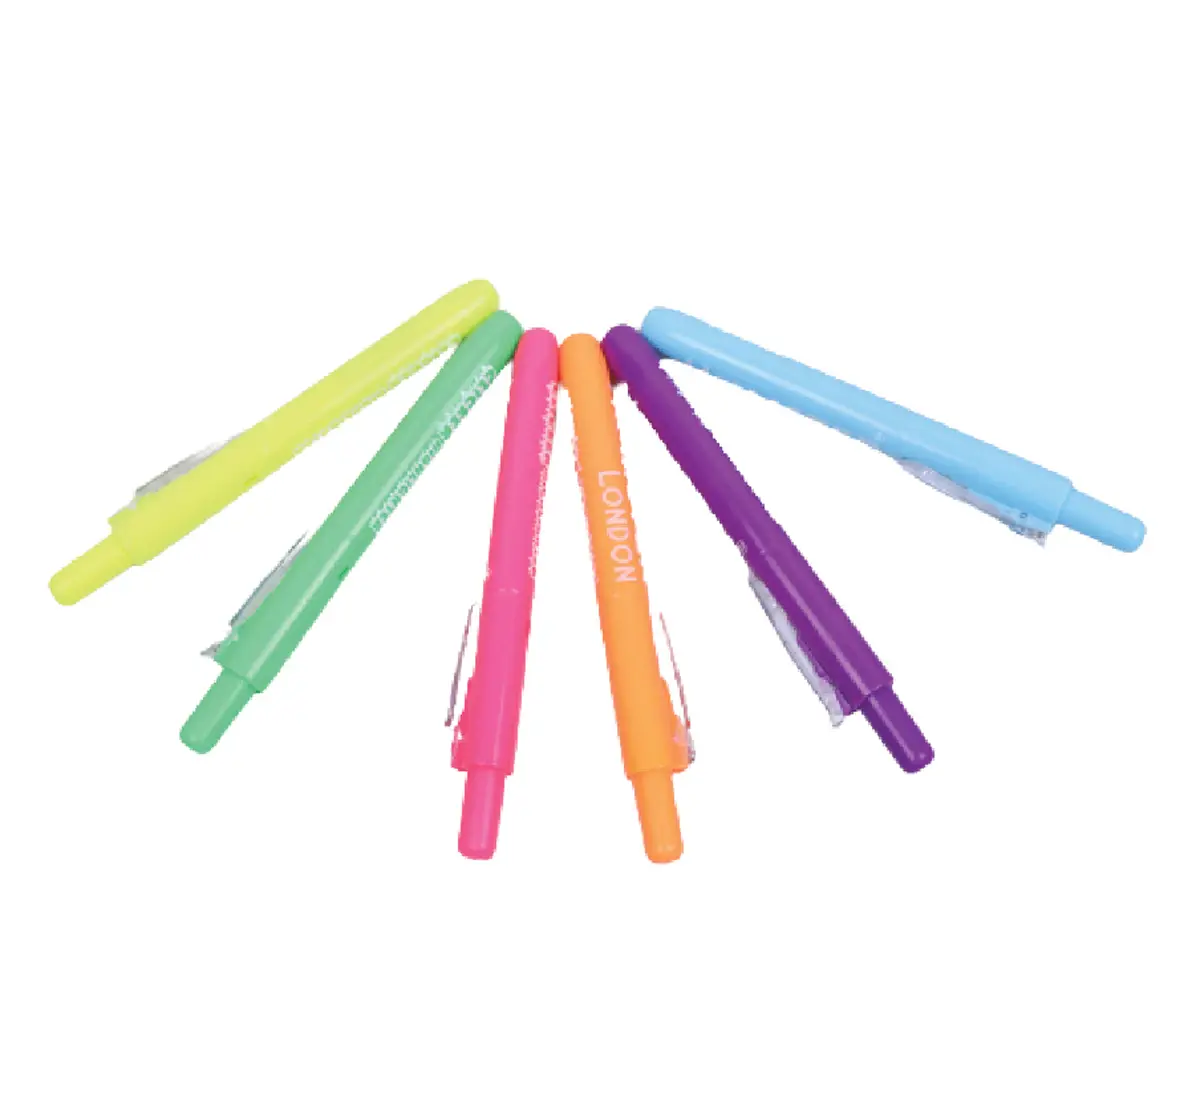 Quirky Clicker Highlighter by Hamster London,Chisel Tip Fine Grip Marker,Ideal Gifts For Stationery Hoarders & Kids, 3Y+